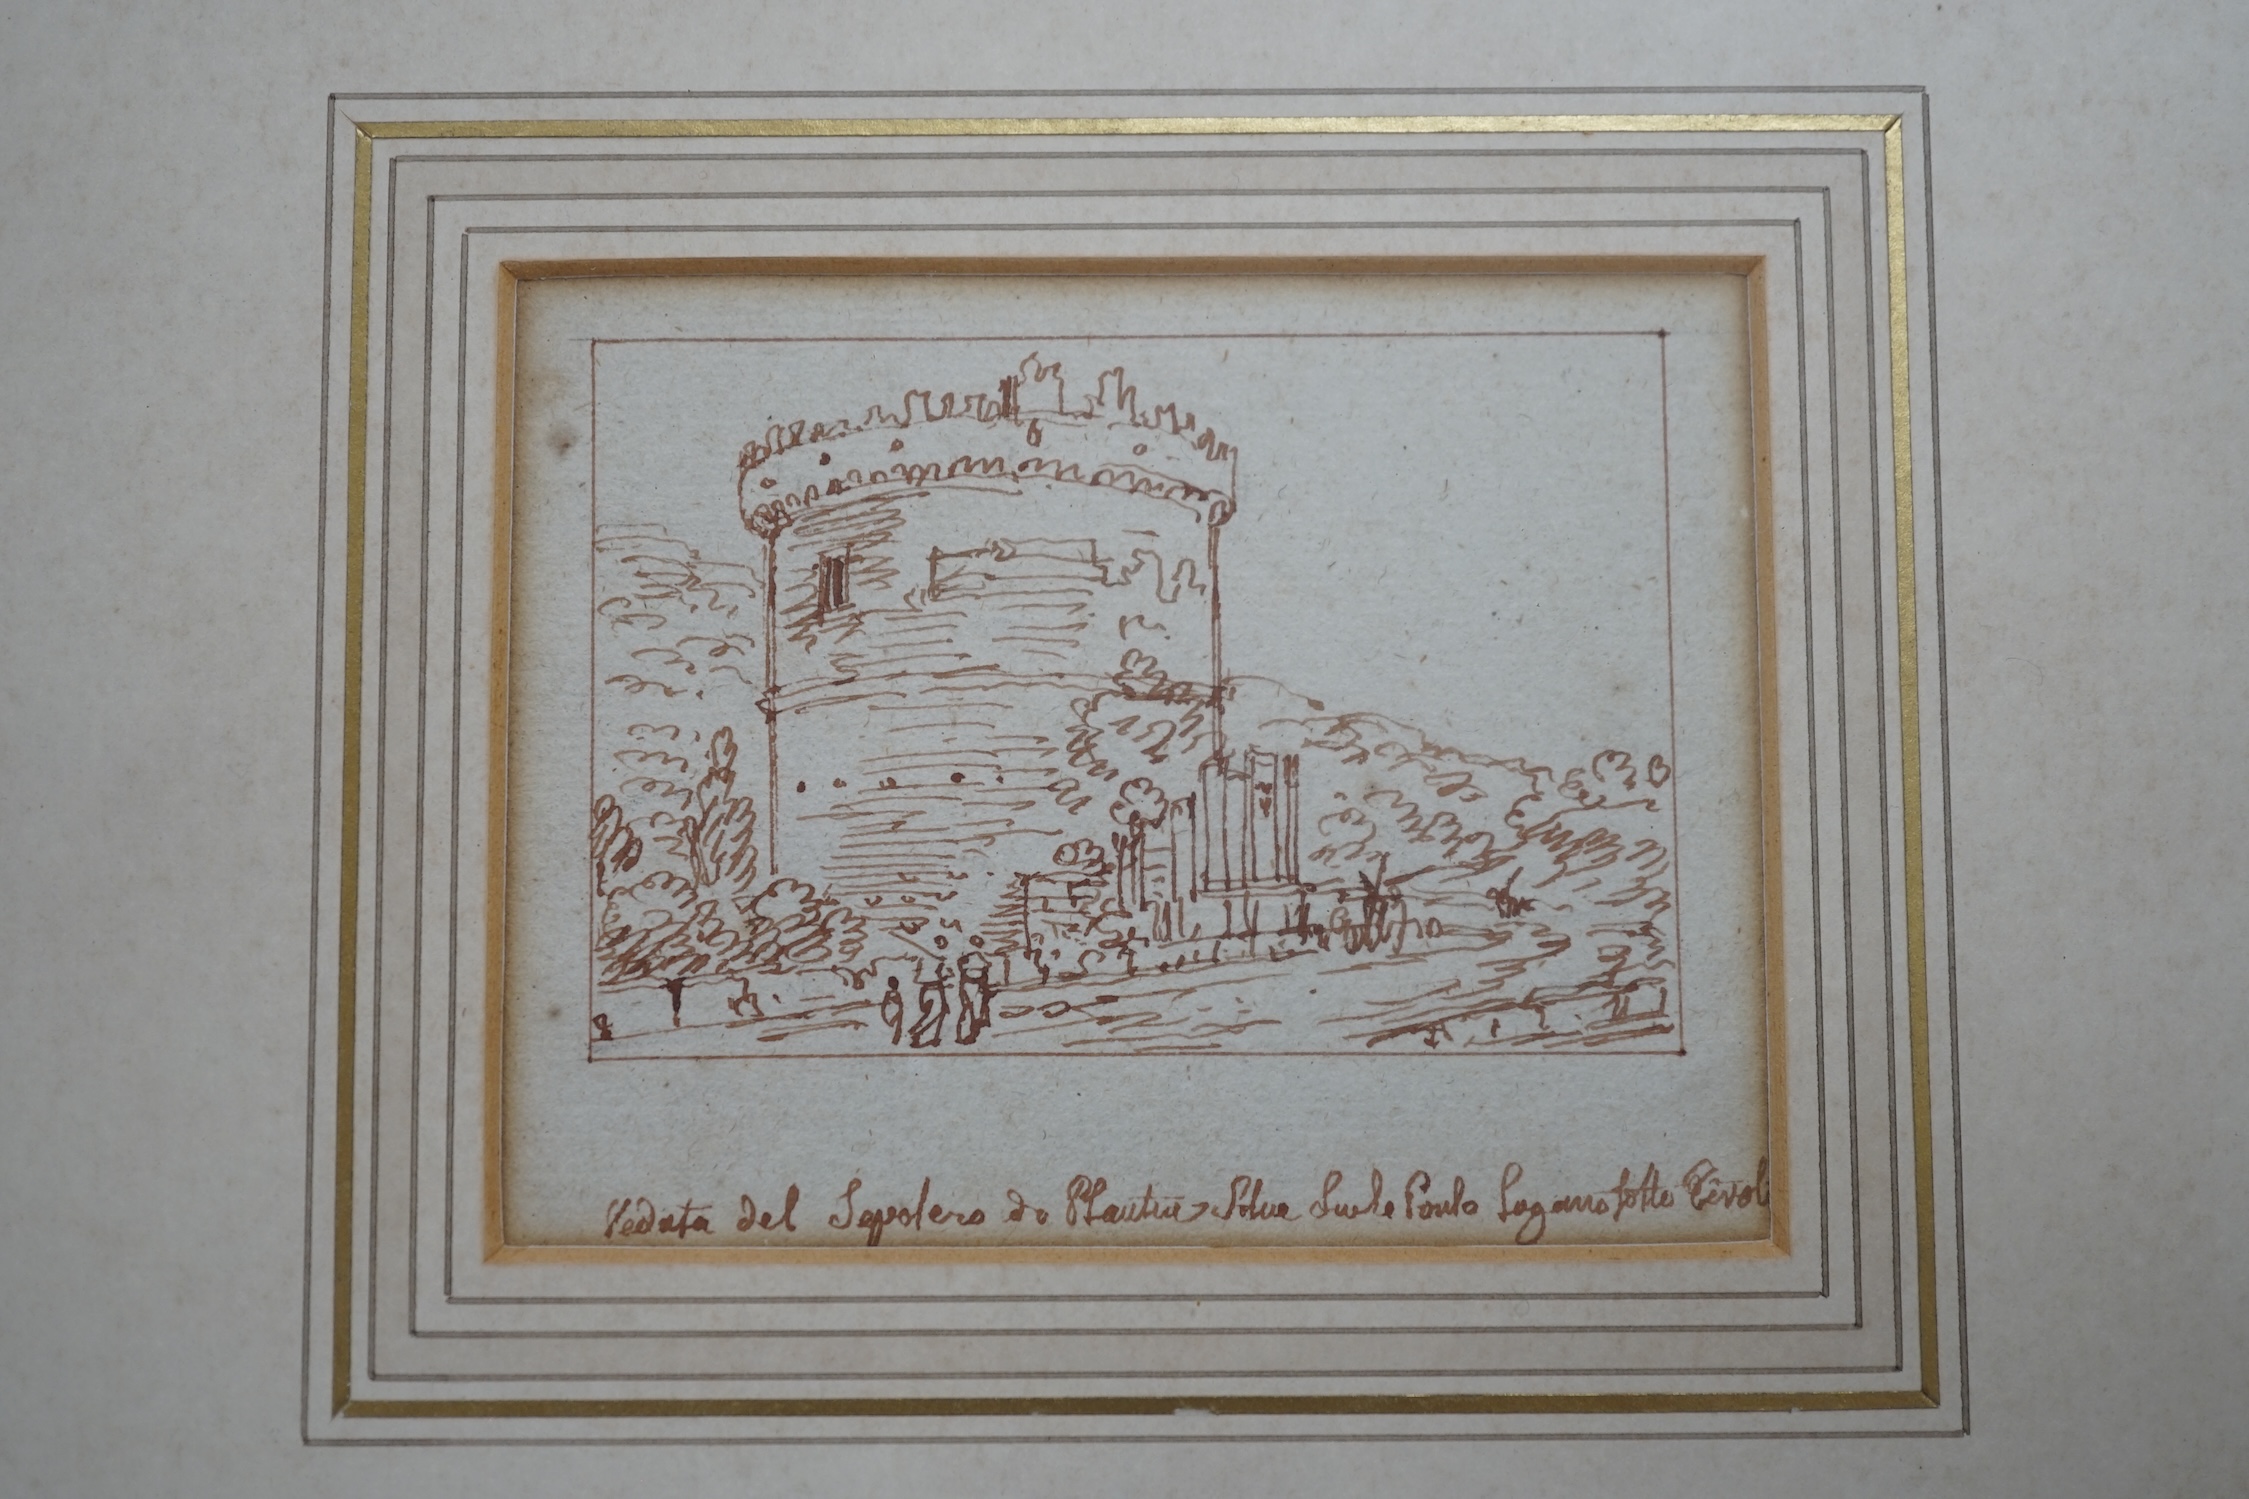 Two 18th / 19th century monochrome and sepia ink sketches, Italian views, one by Victor Jean Nicolle (French, 1754-1826), 'The Palazzo Maggiore near the Via Nuova', Abbott & Holder inscribed gallery label verso, largest